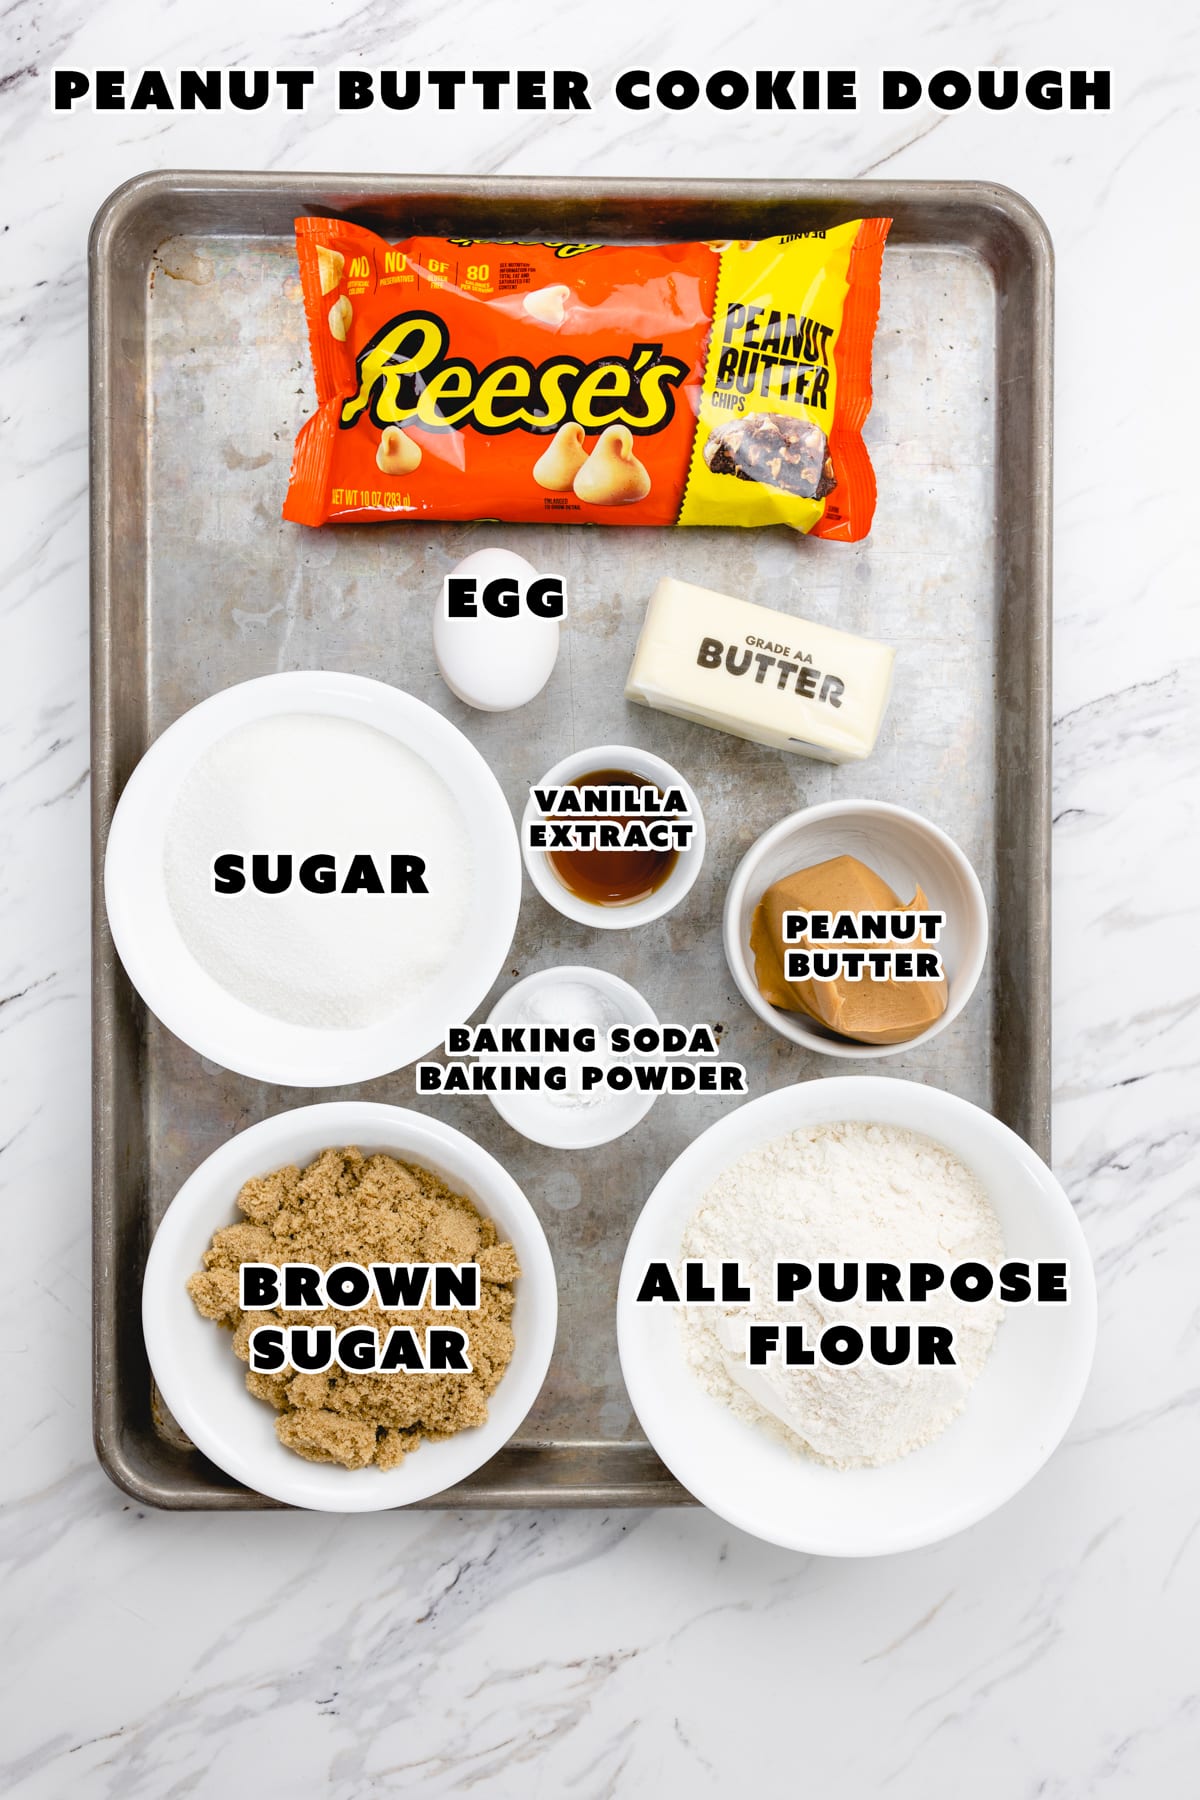 Top view of ingredients needed to make Peanut Butter Cookie dough on a baking tray.